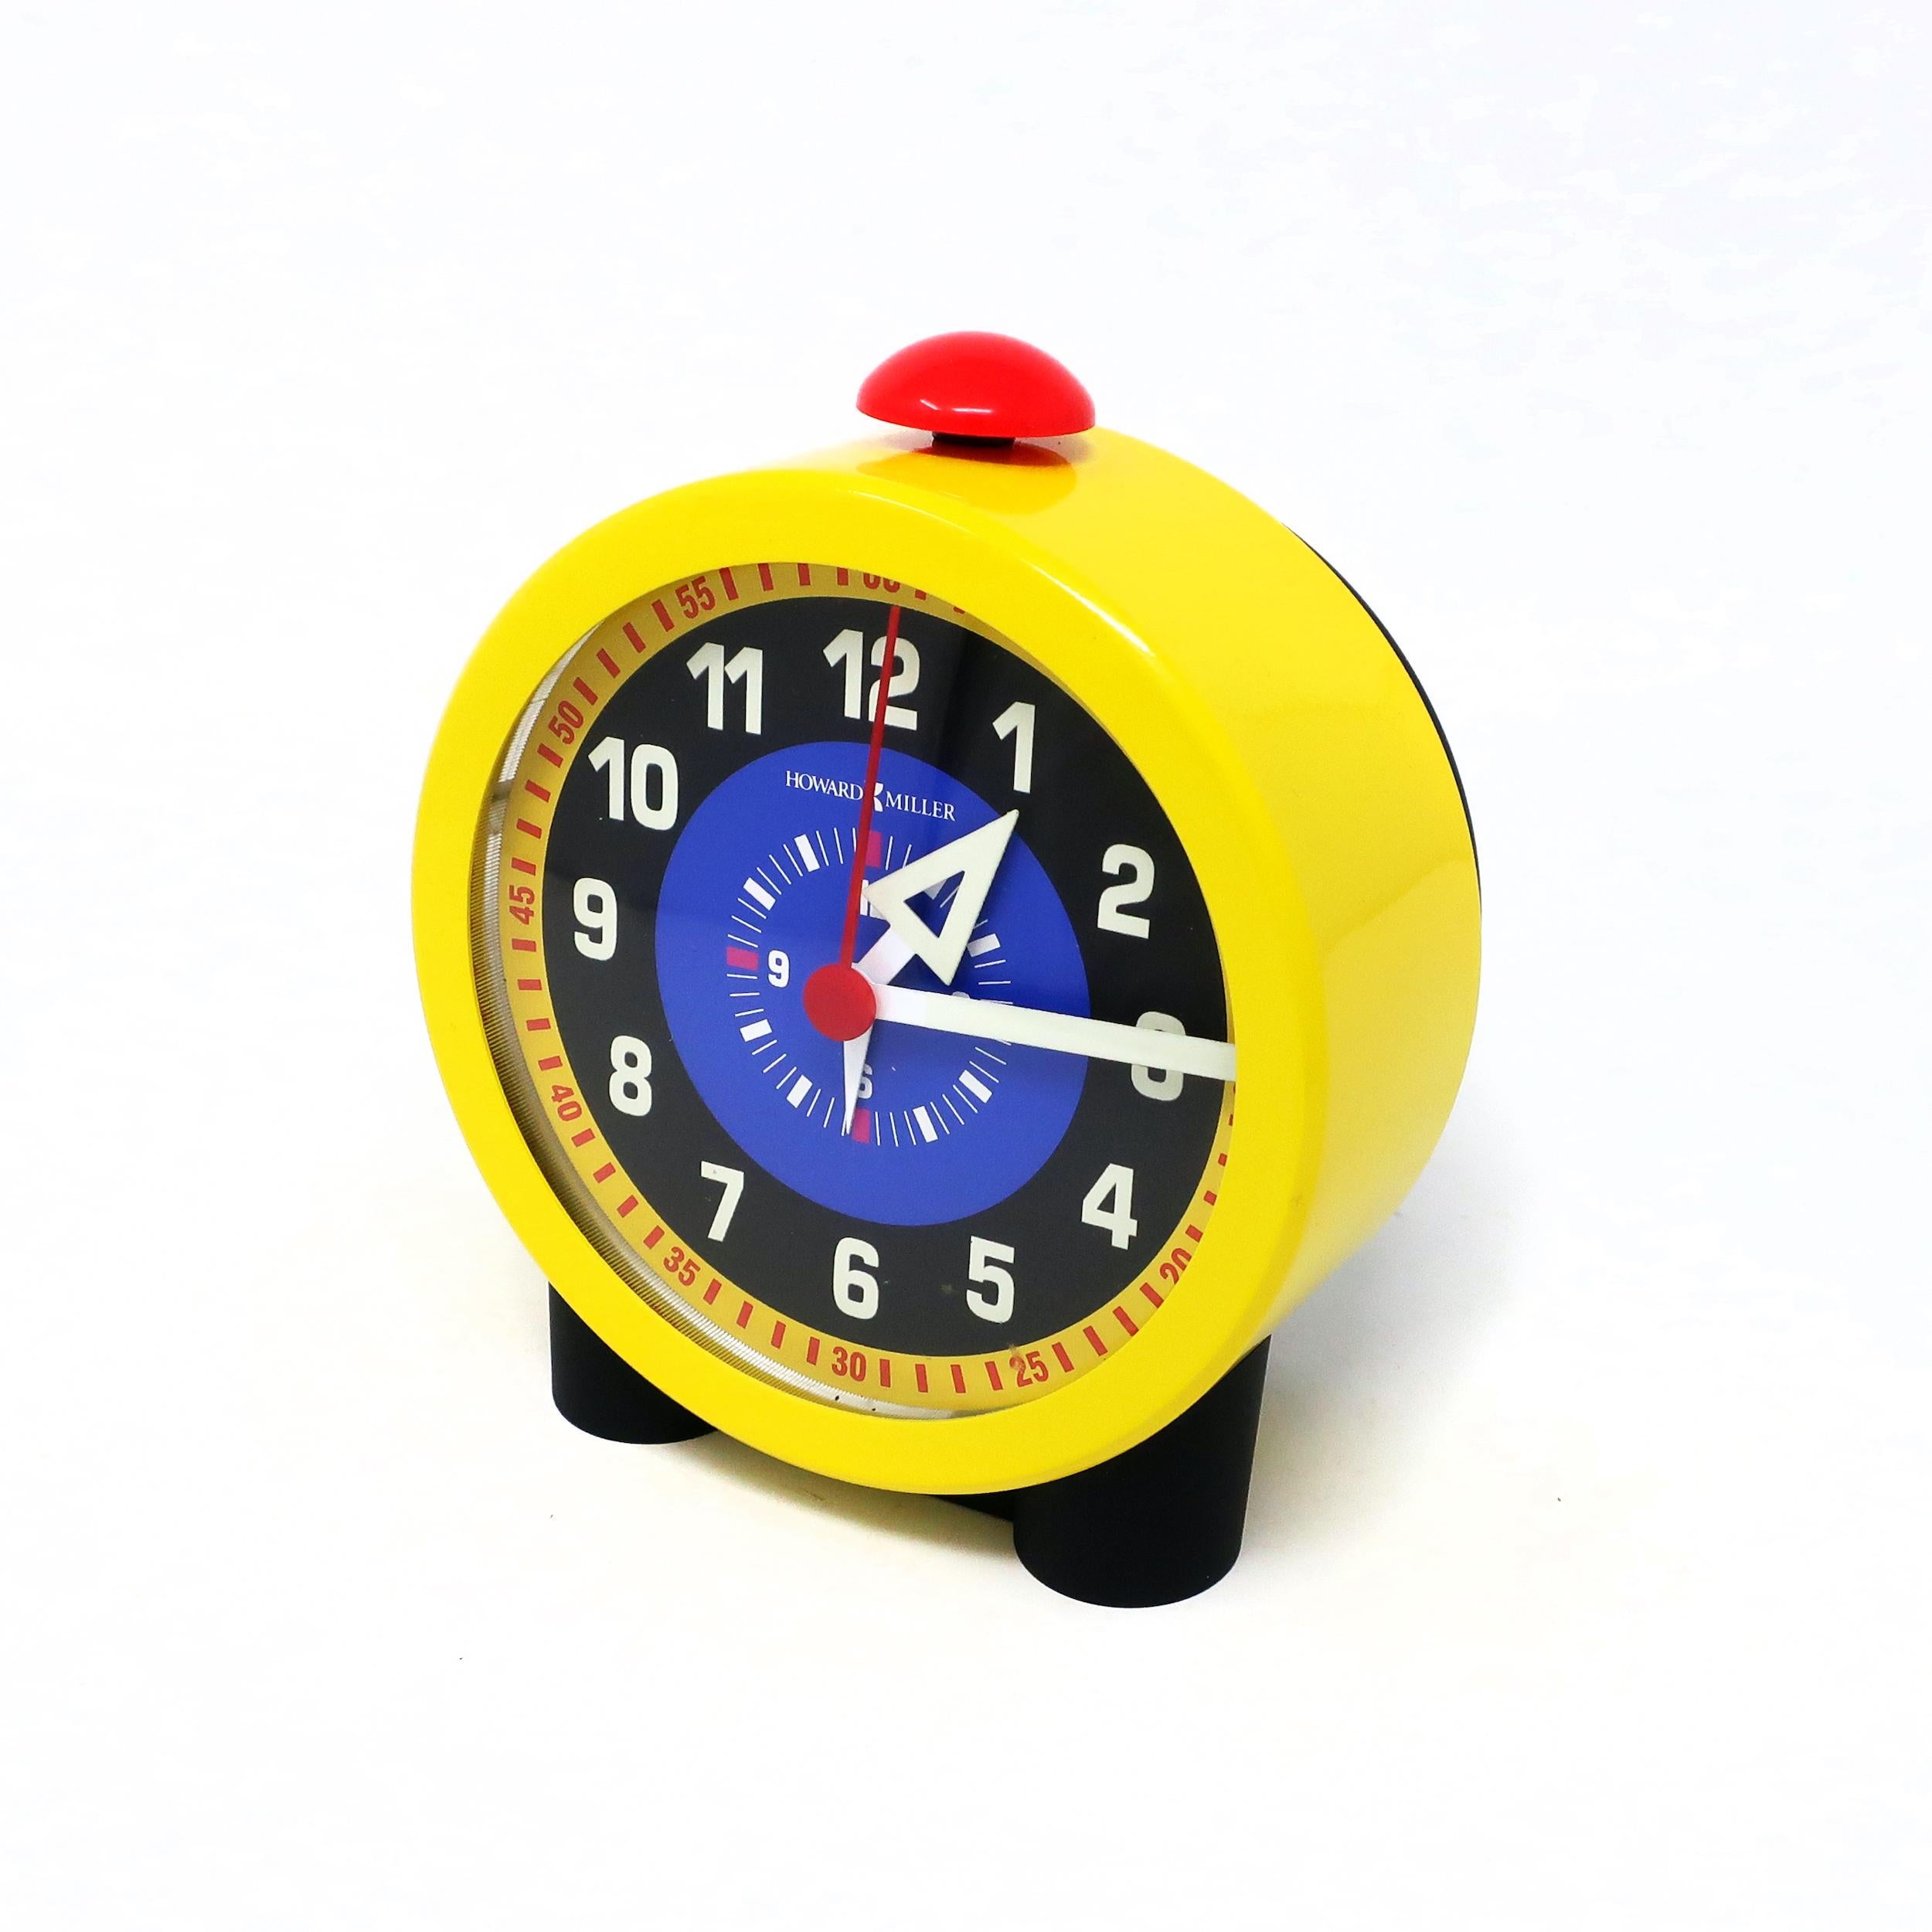 In the style of George Nelson's pioneering clock design for Howard Miller, this alarm clock has a multi-colored face, bright yellow metal case, and prominent red alarm button on its top. Makes a delightfully classic metal alarm clock sound when it